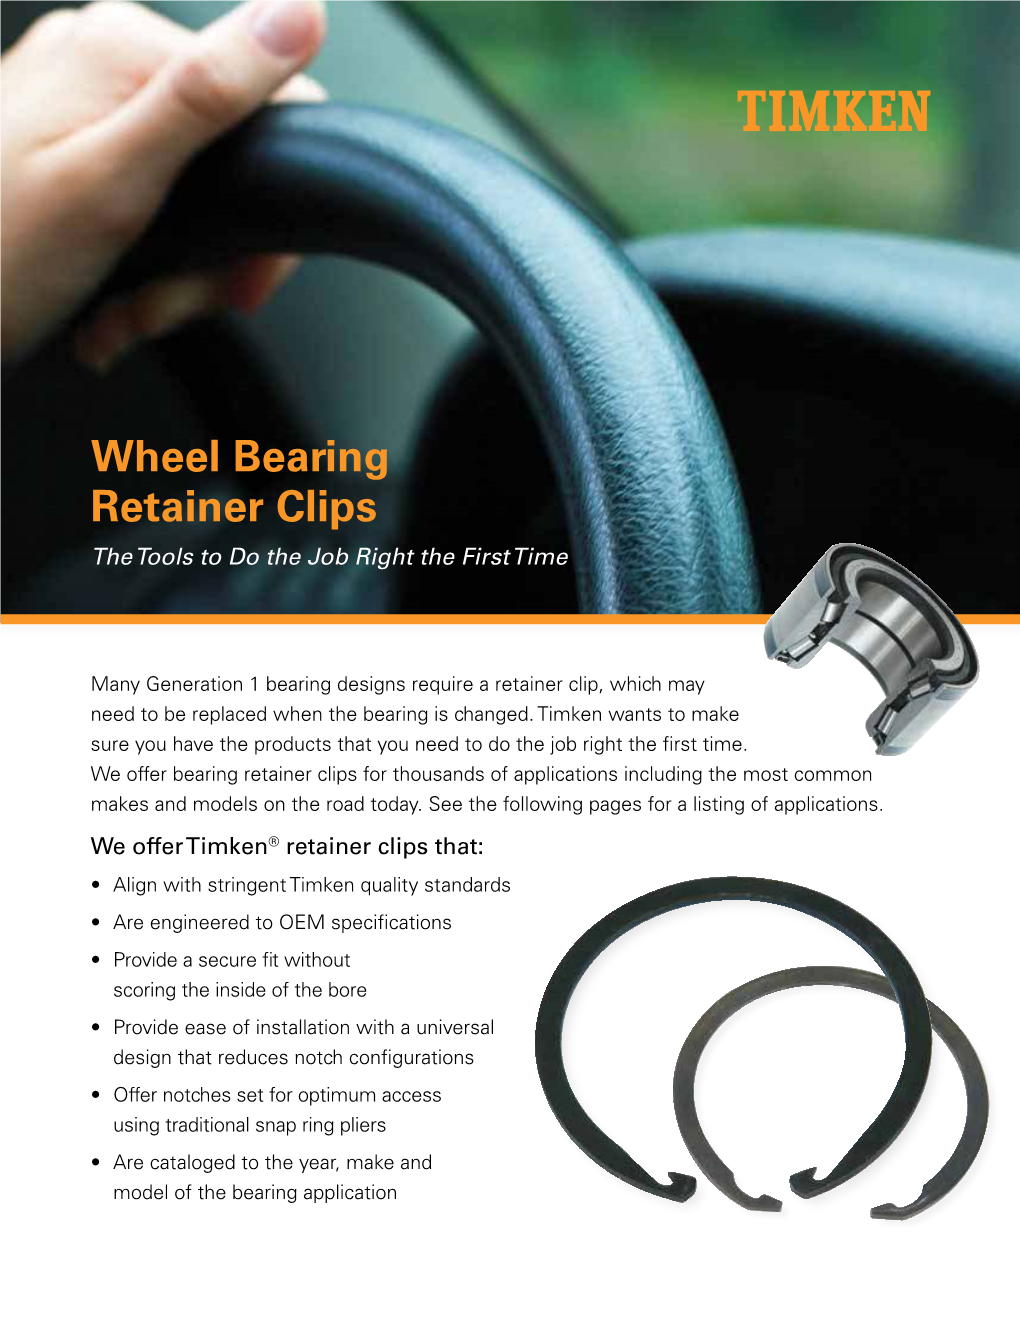 Wheel Bearing Retainer Clips the Tools to Do the Job Right the First Time